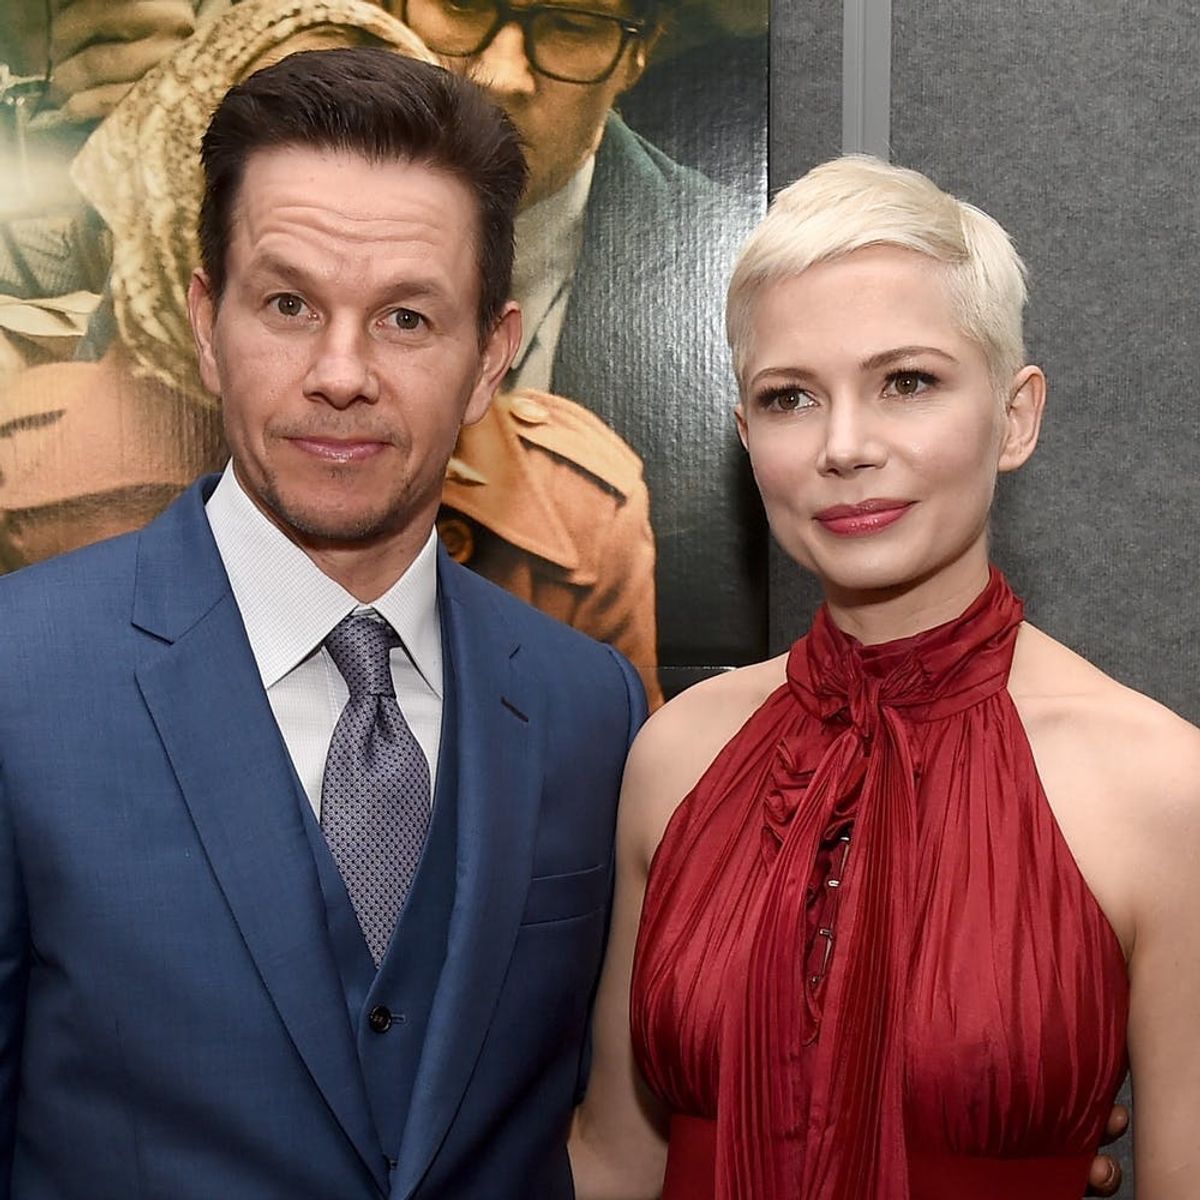 Mark Wahlberg Reportedly Made 1,500 Times More Than Michelle Williams for a Reshoot